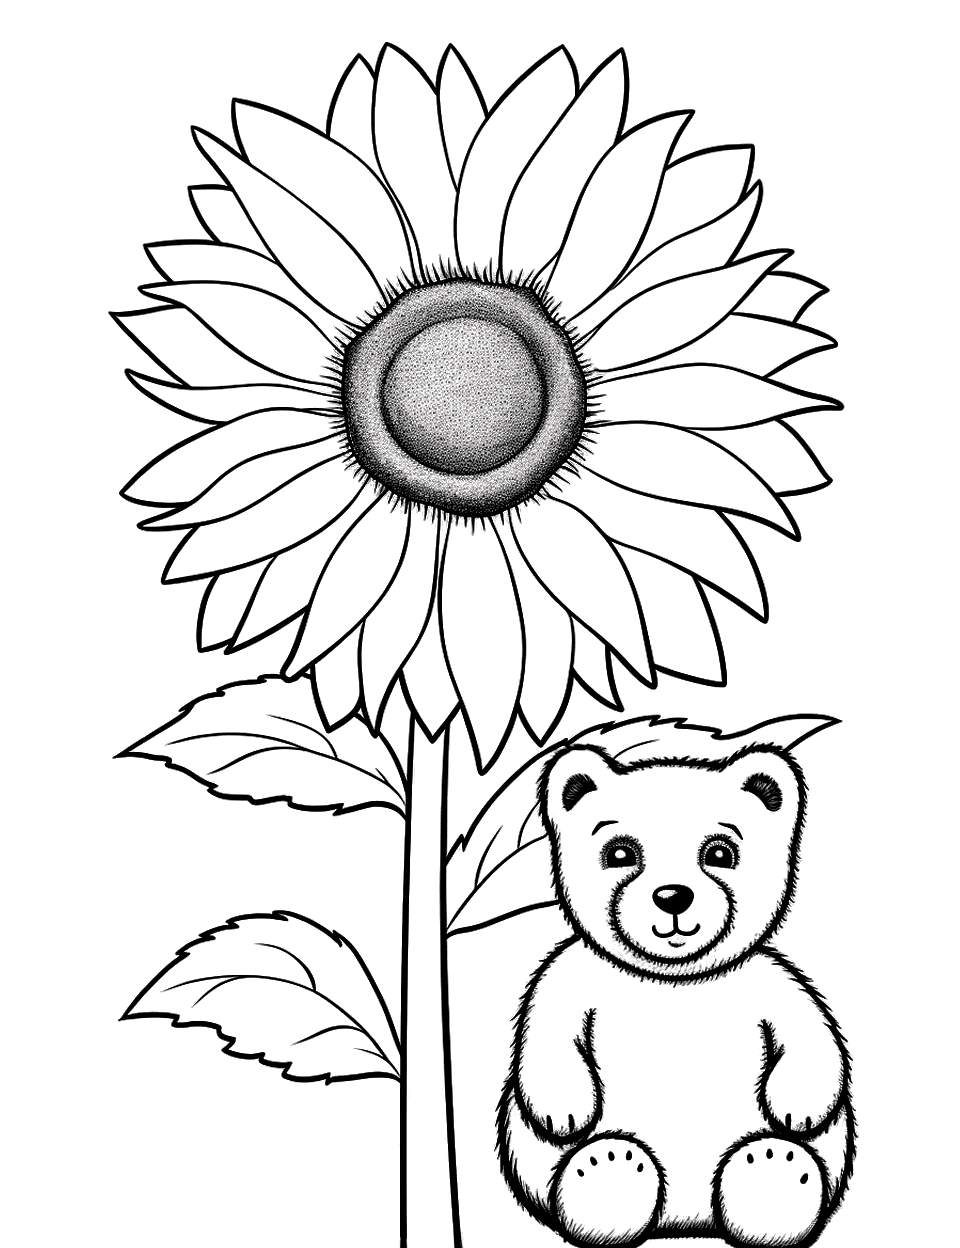 Sunflower and Teddy Bear Coloring Page - A sunflower with a teddy bear sitting beside it.